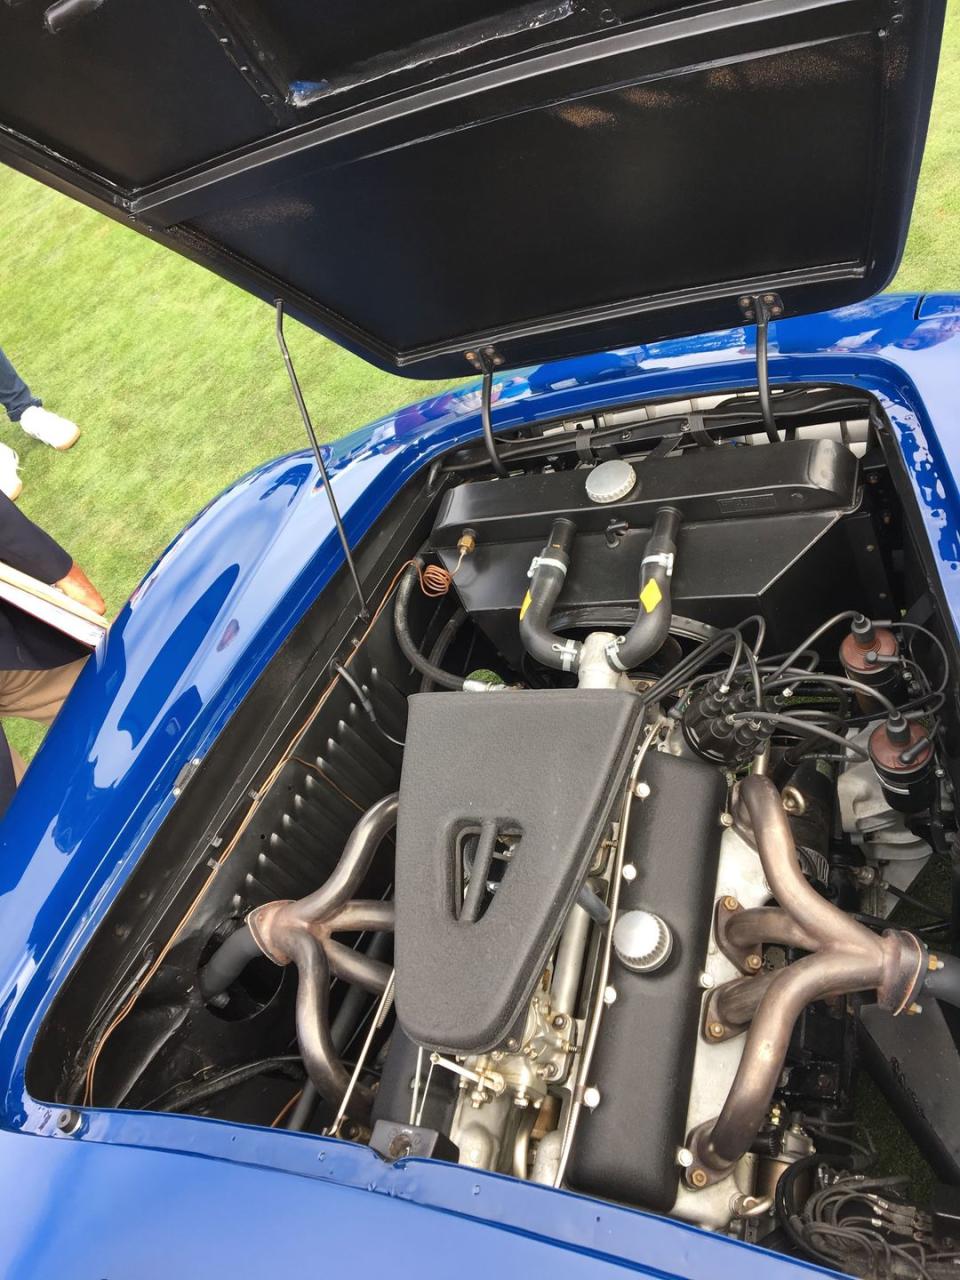 View Photos of Engines of Pebble Beach